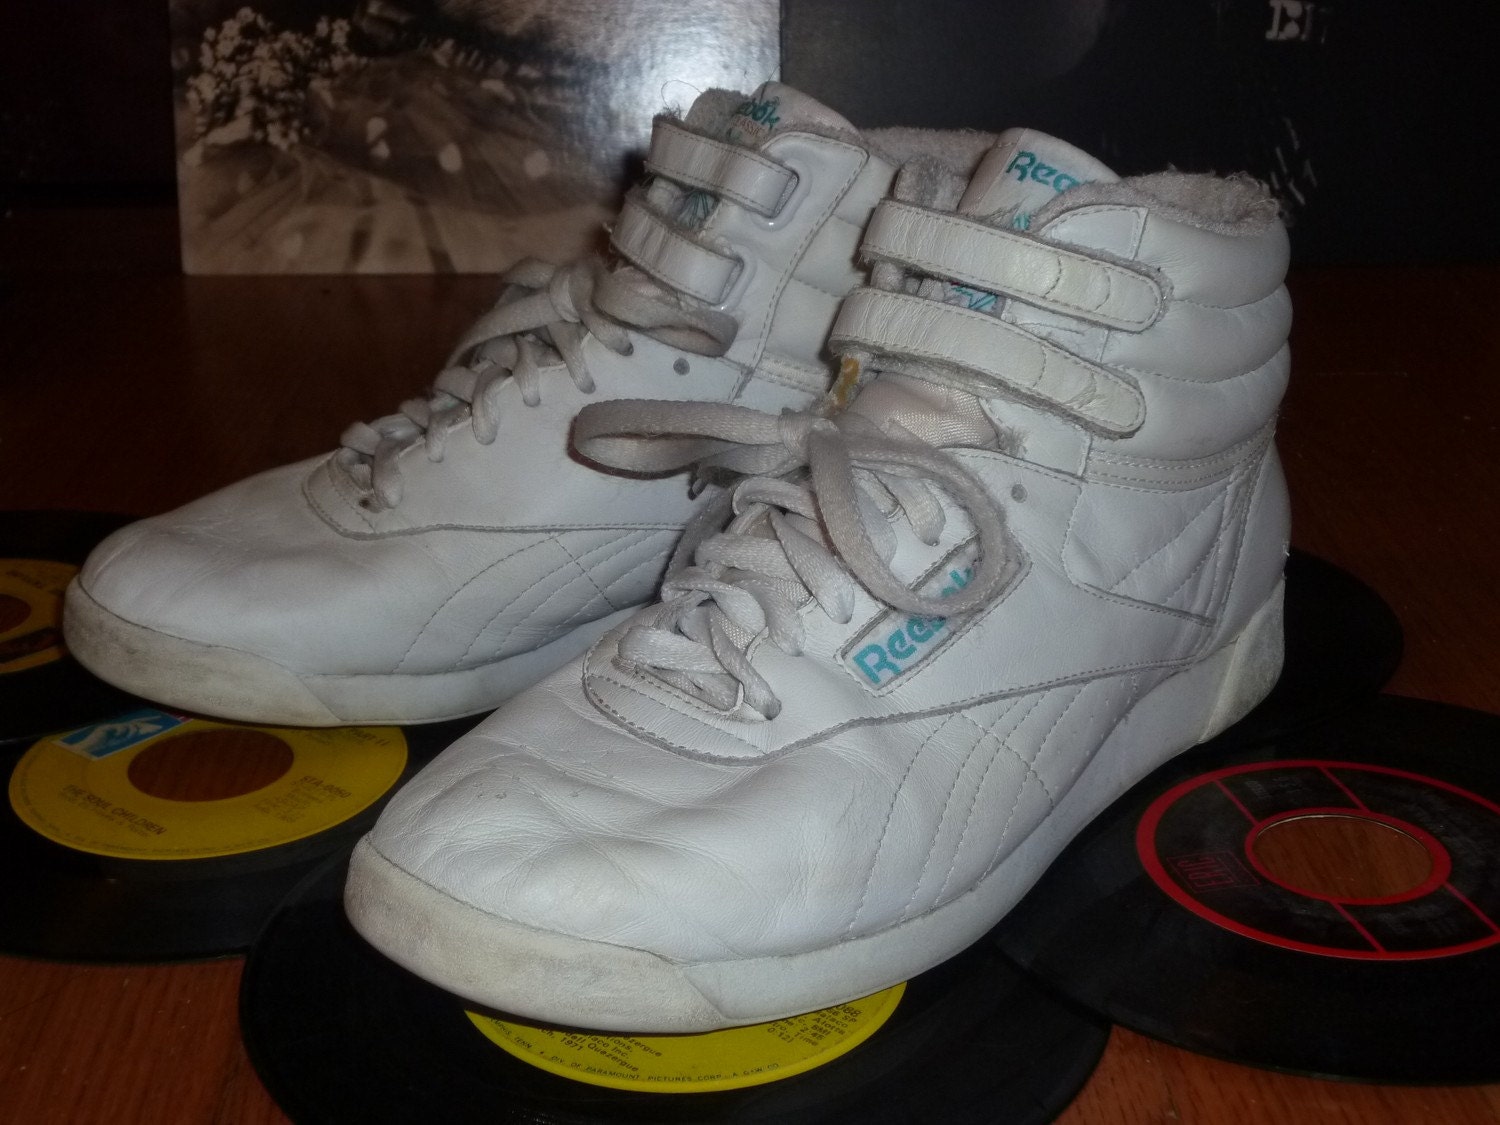 80's Reebok High Tops White Leather by getmodern on Etsy